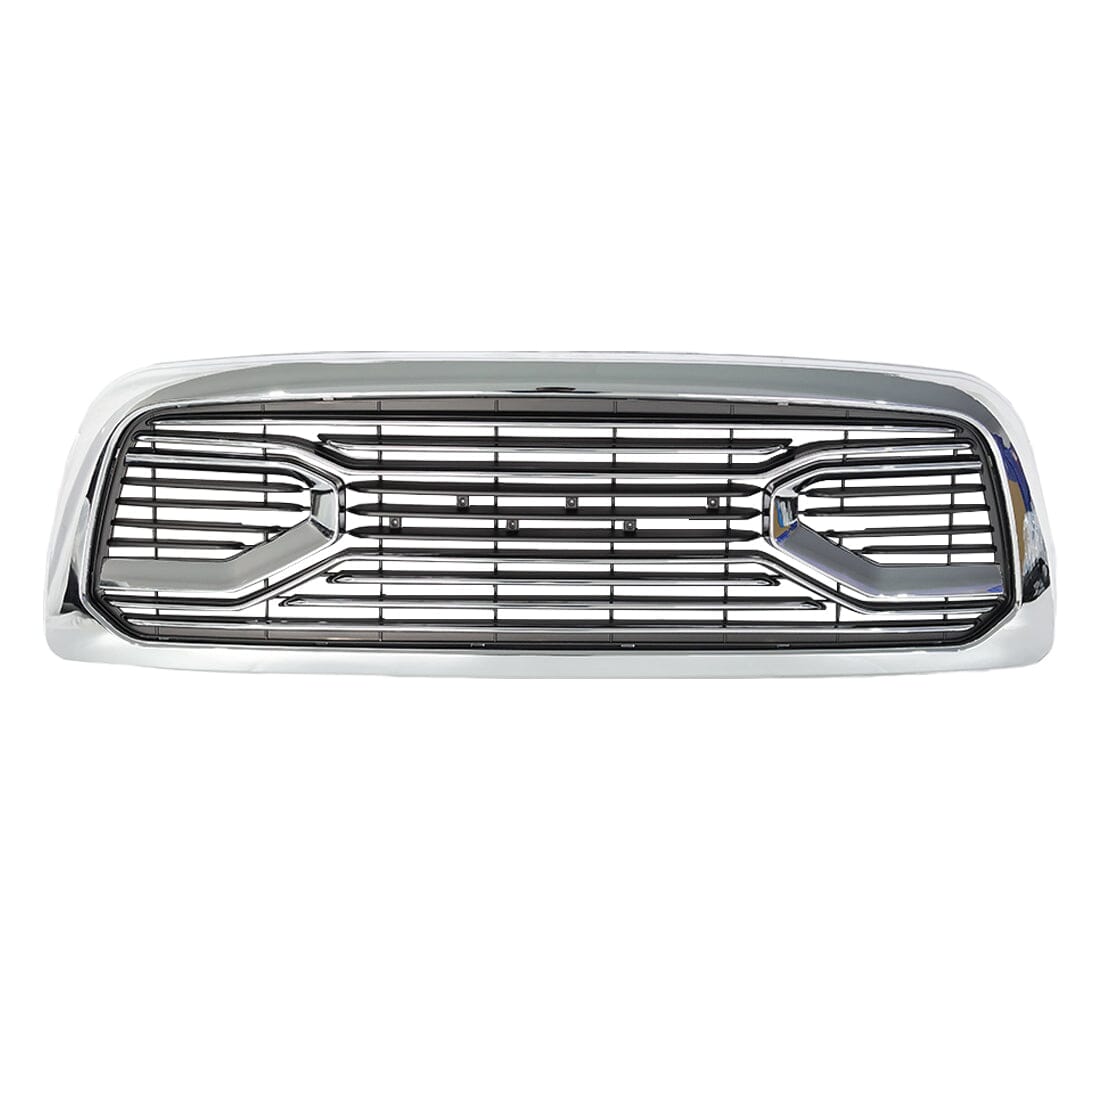 Chrome Big Horn Style Front Grille For 2009-2013 Dodge Ram 1500| Amoffroad